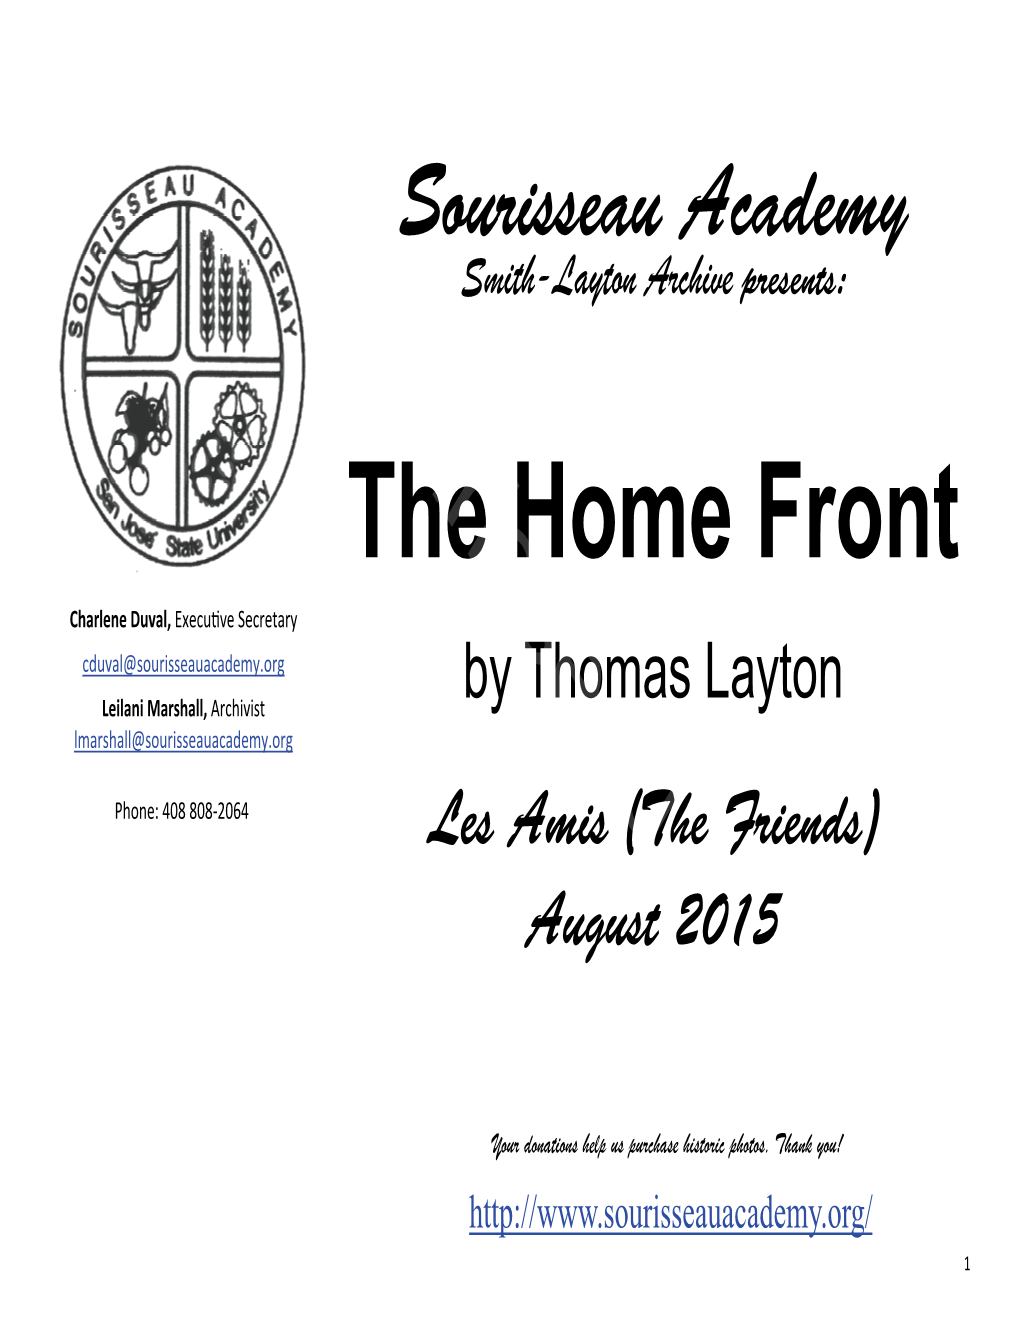 Sourisseau Academy Smith-Layton Archive Presents: the Home Front